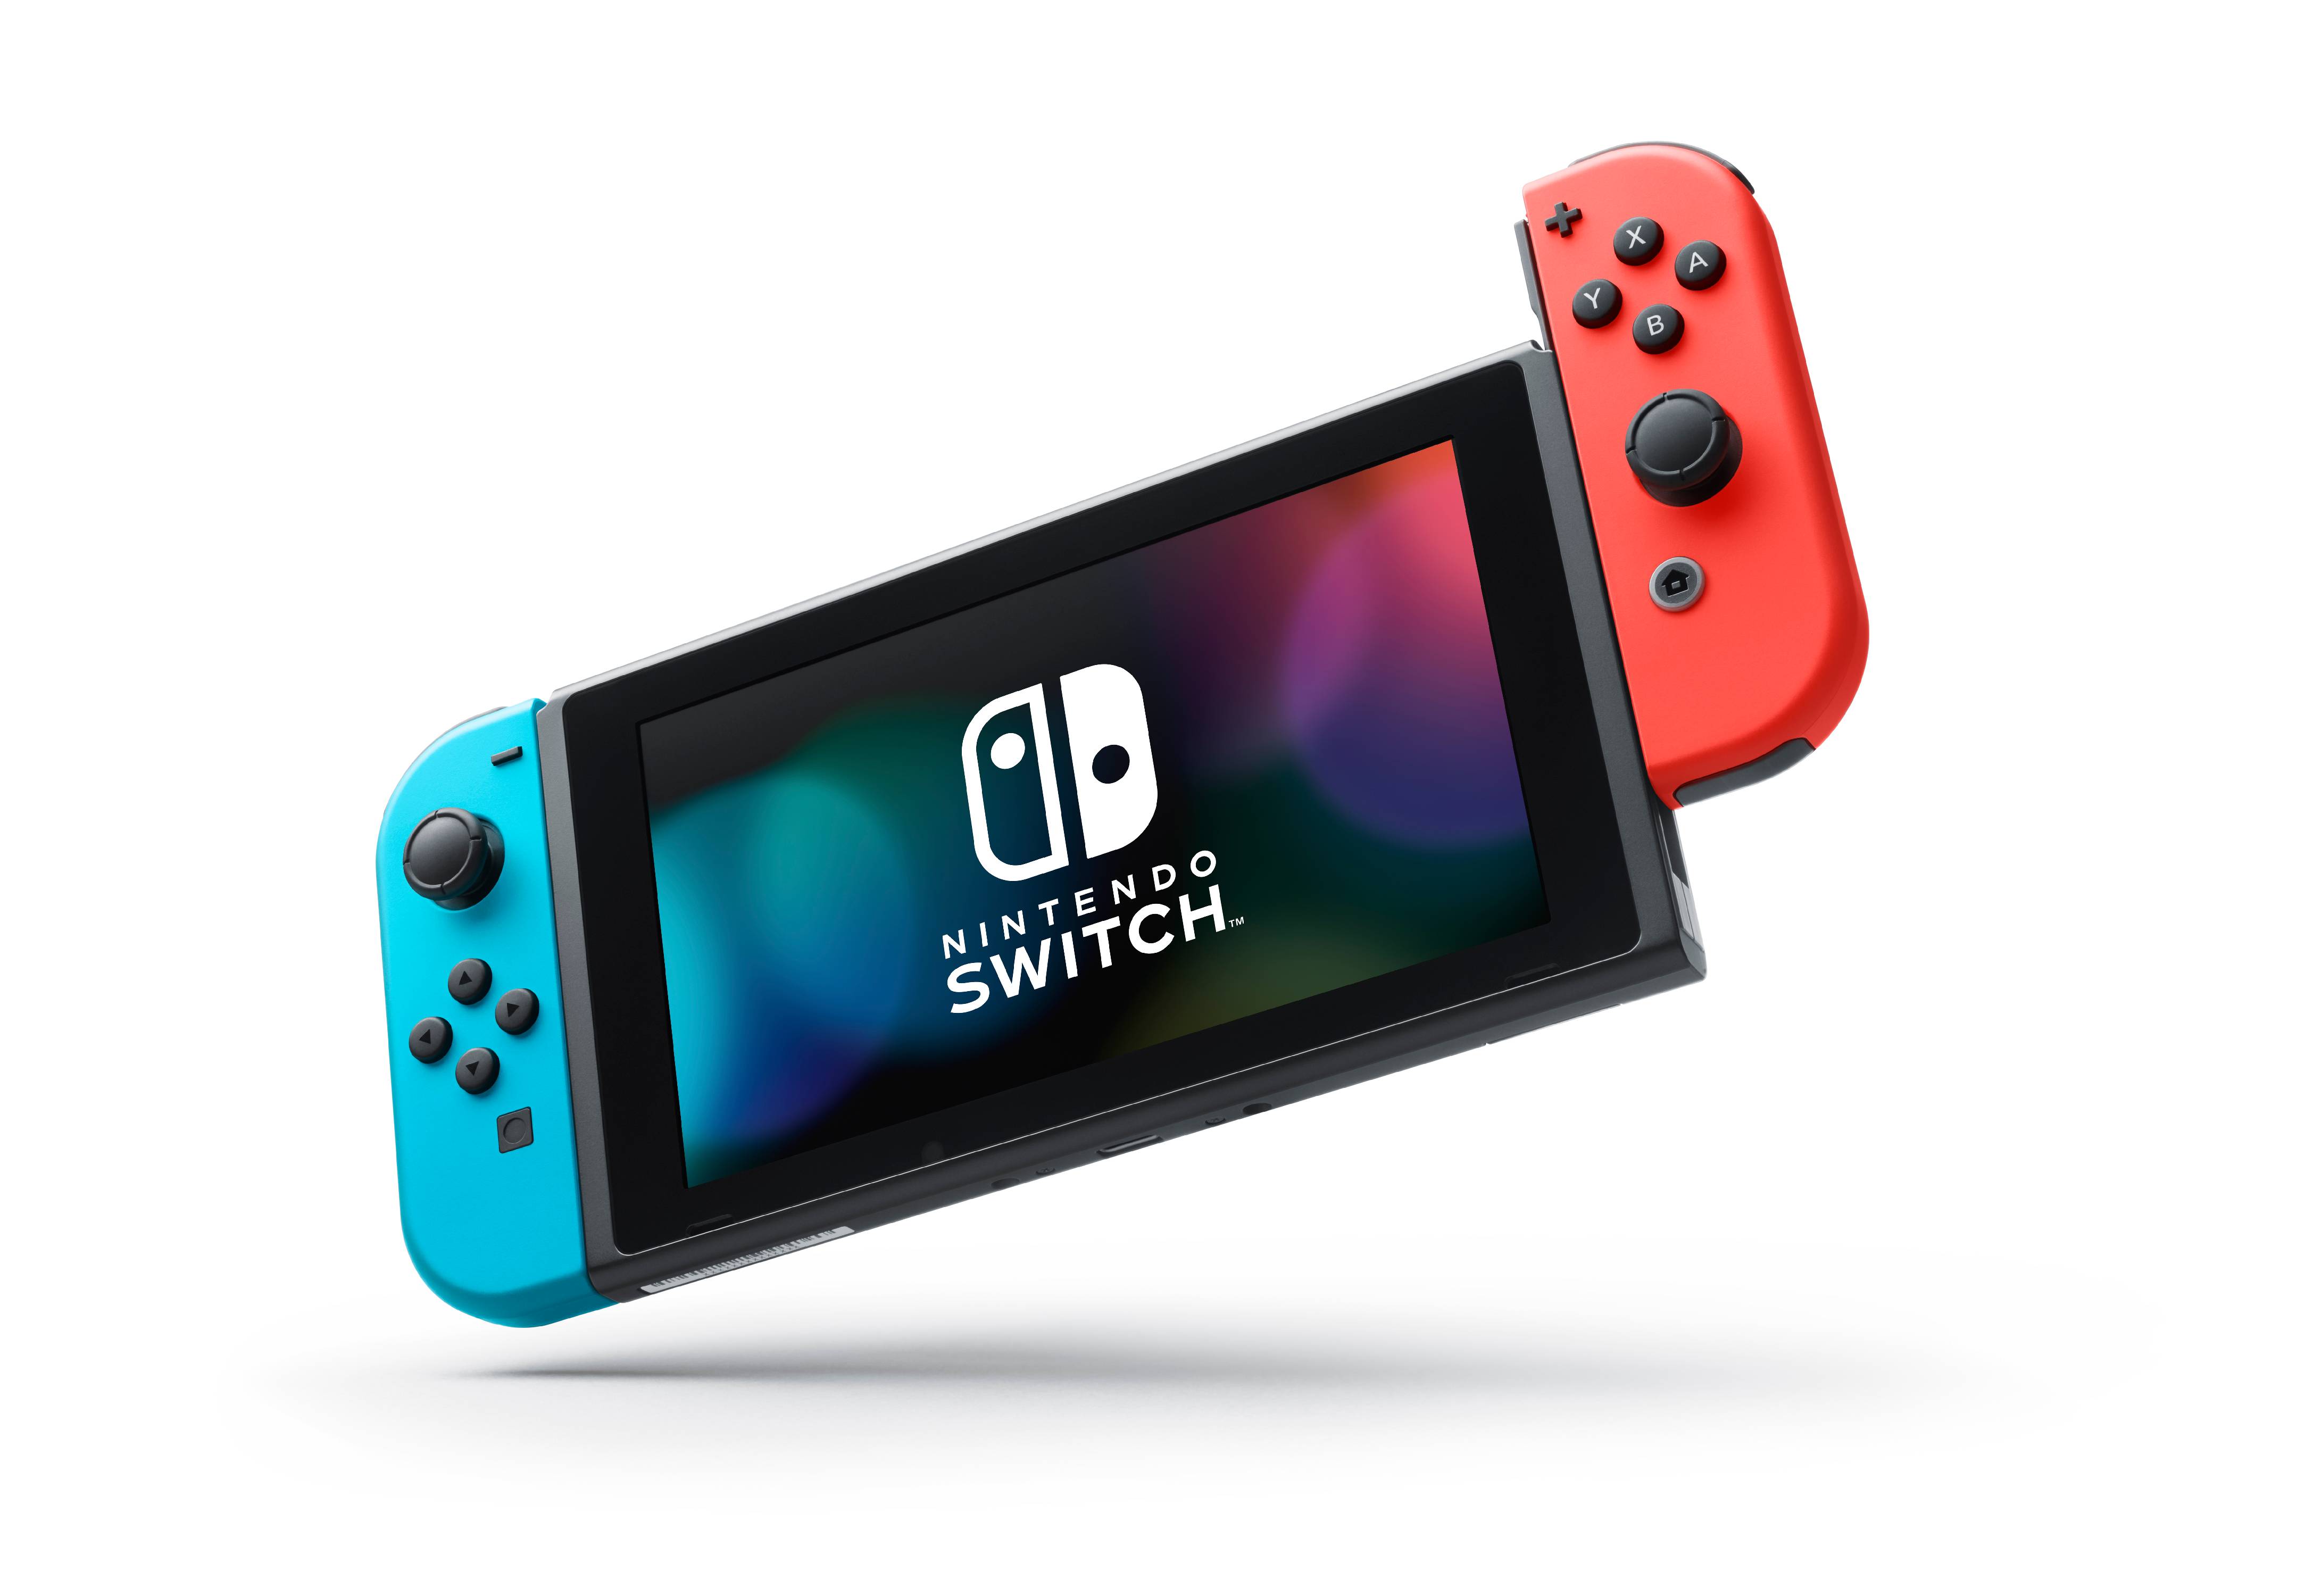 Restored Nintendo HACSKABAA Switch Gaming Console with Neon Blue and Neon Red Joy-Con (Refurbished) - image 1 of 5